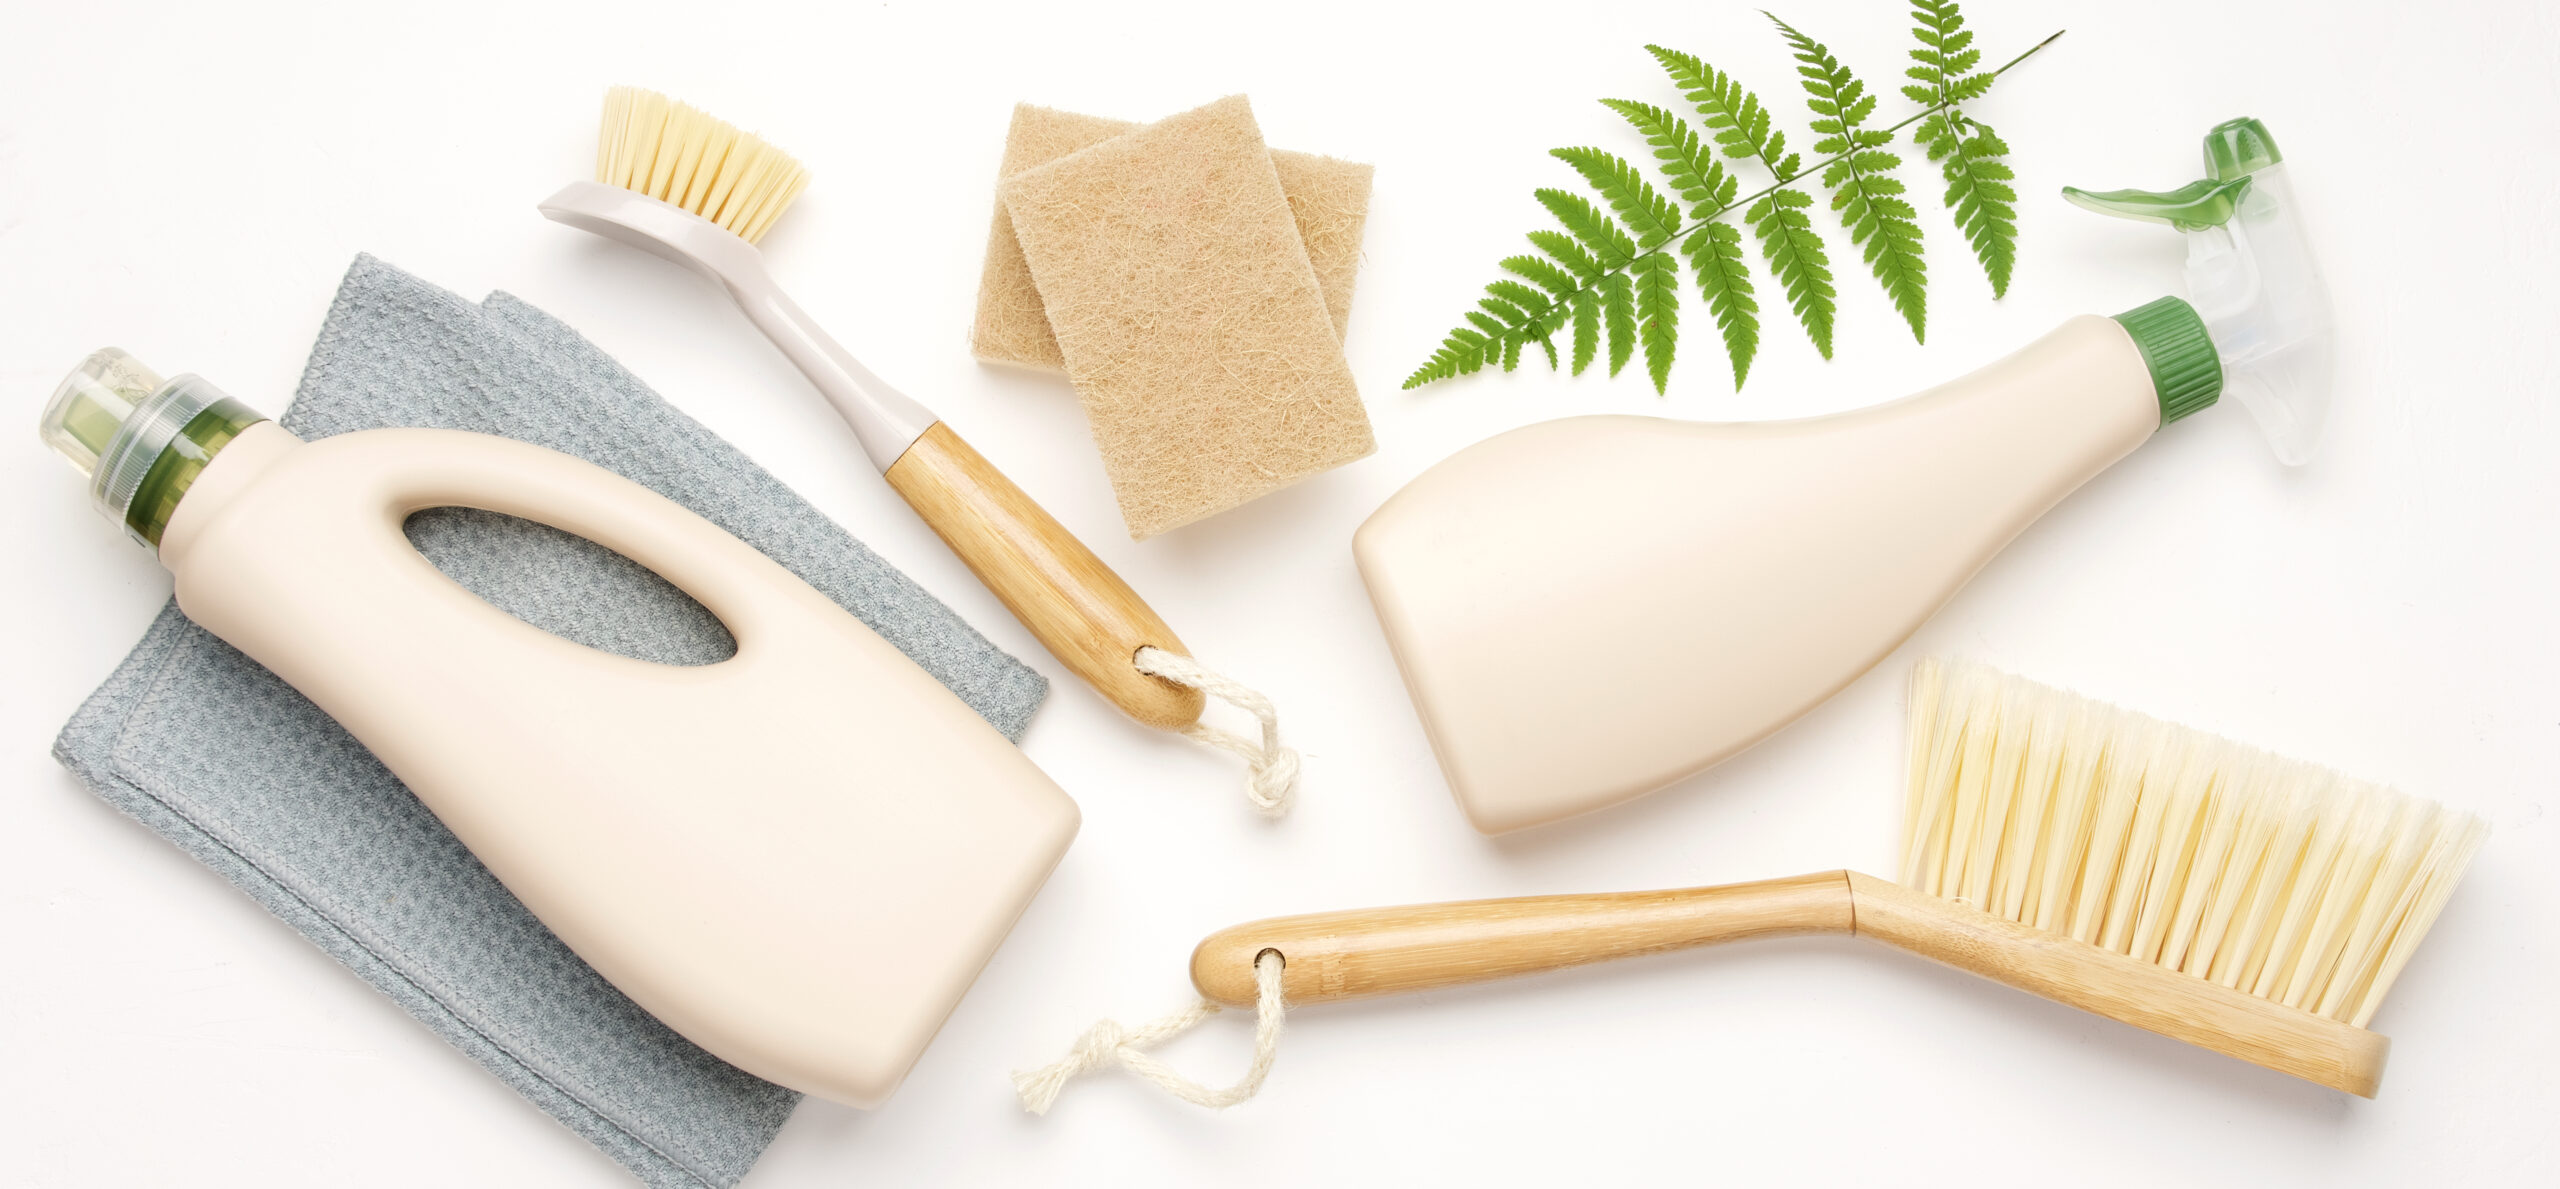 9 Best Cleaning Products for your Home